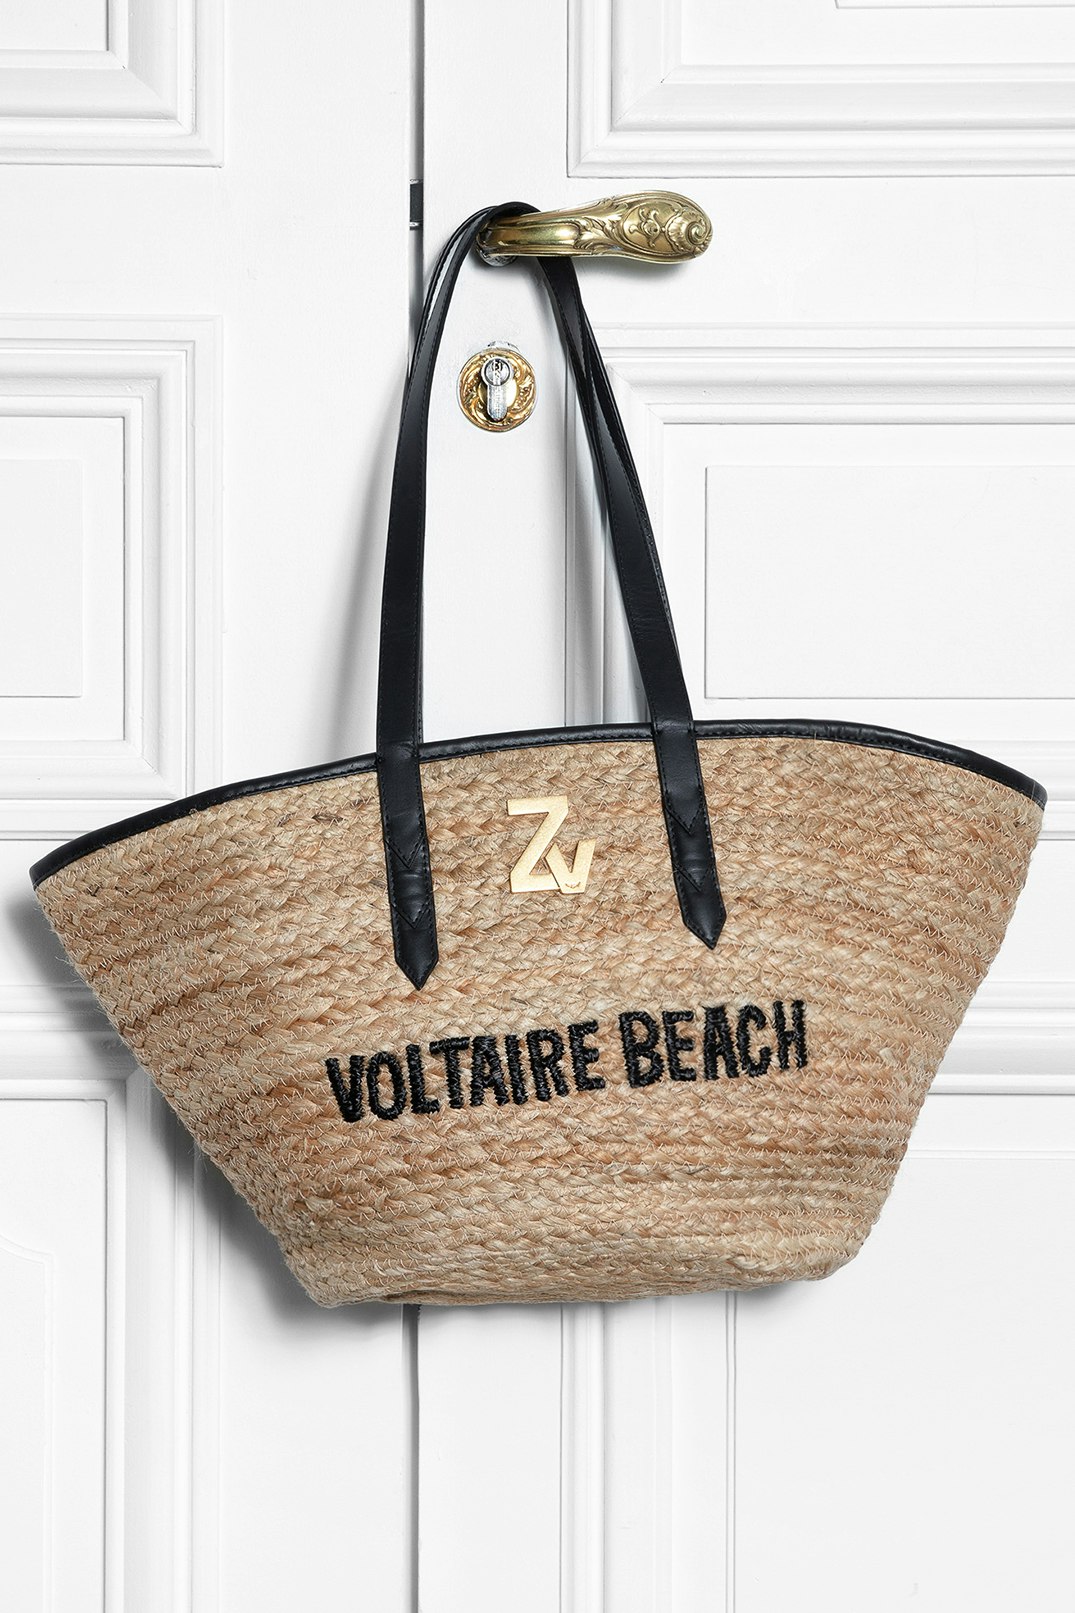 ZV Initiale Le Beach Bag basket Woven wicker and black leather basket